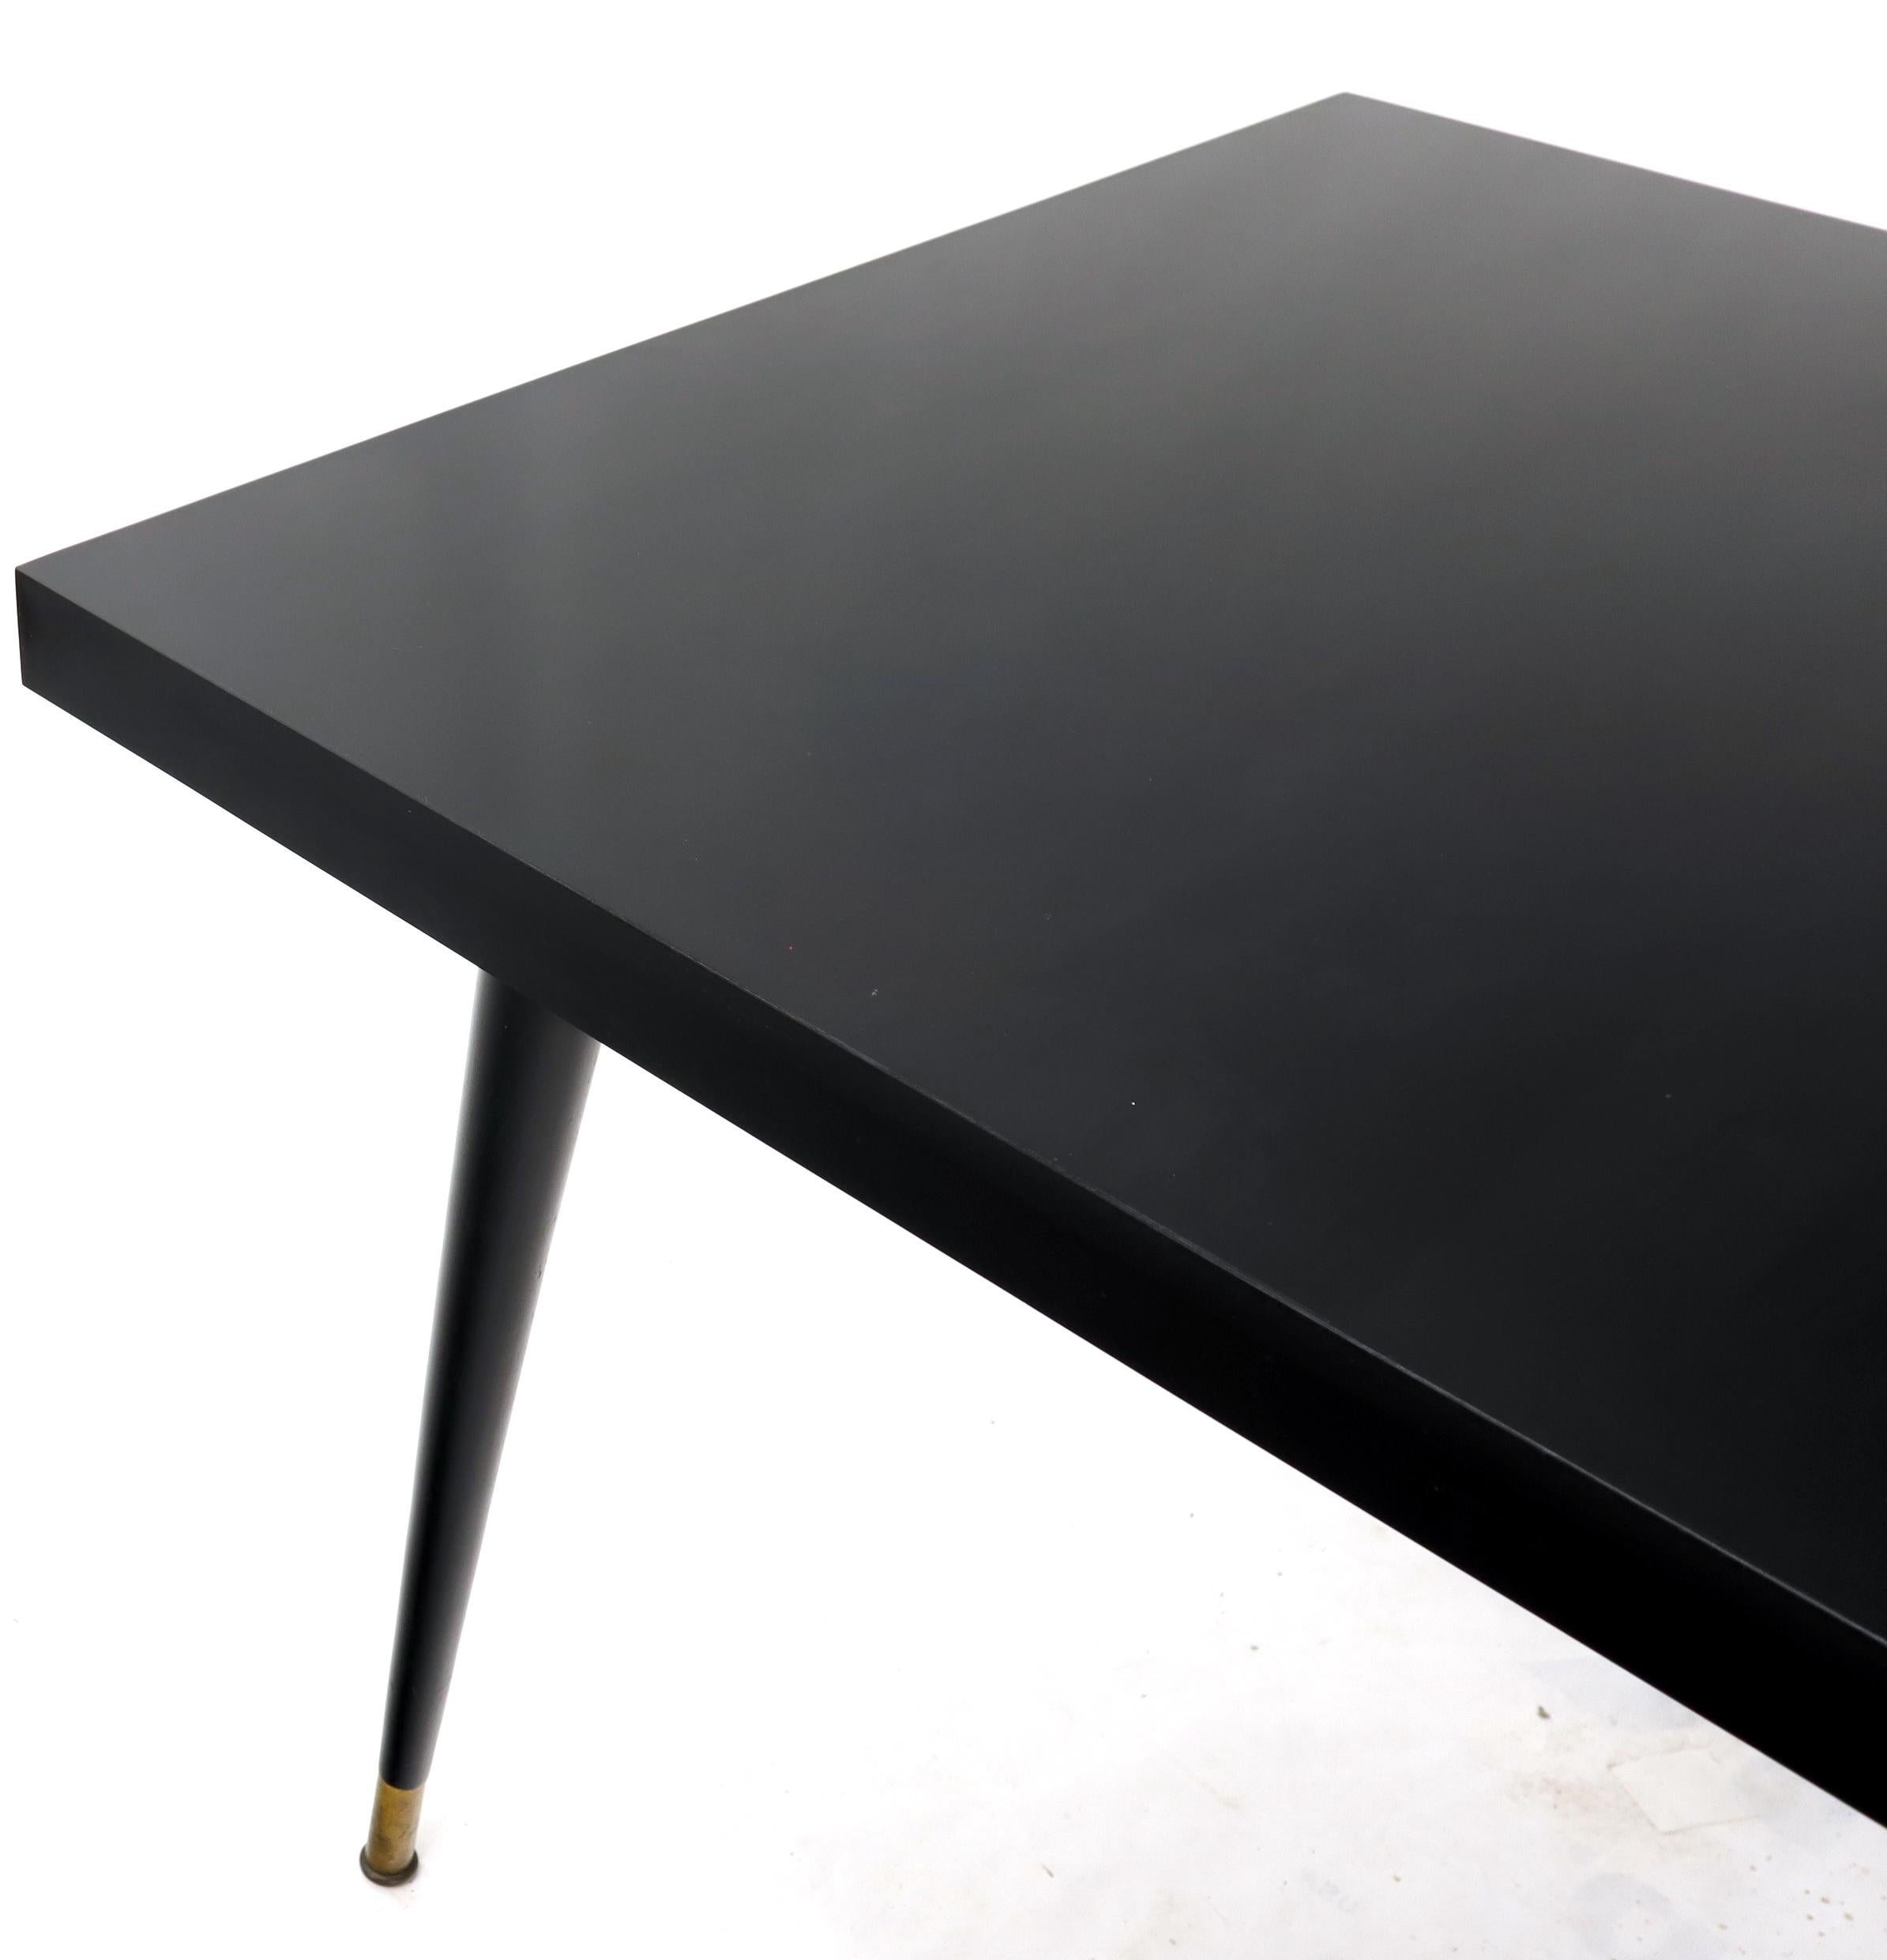 Black Laminate Tapered Dowel Legs Dining Table with Extension Board In Excellent Condition For Sale In Rockaway, NJ